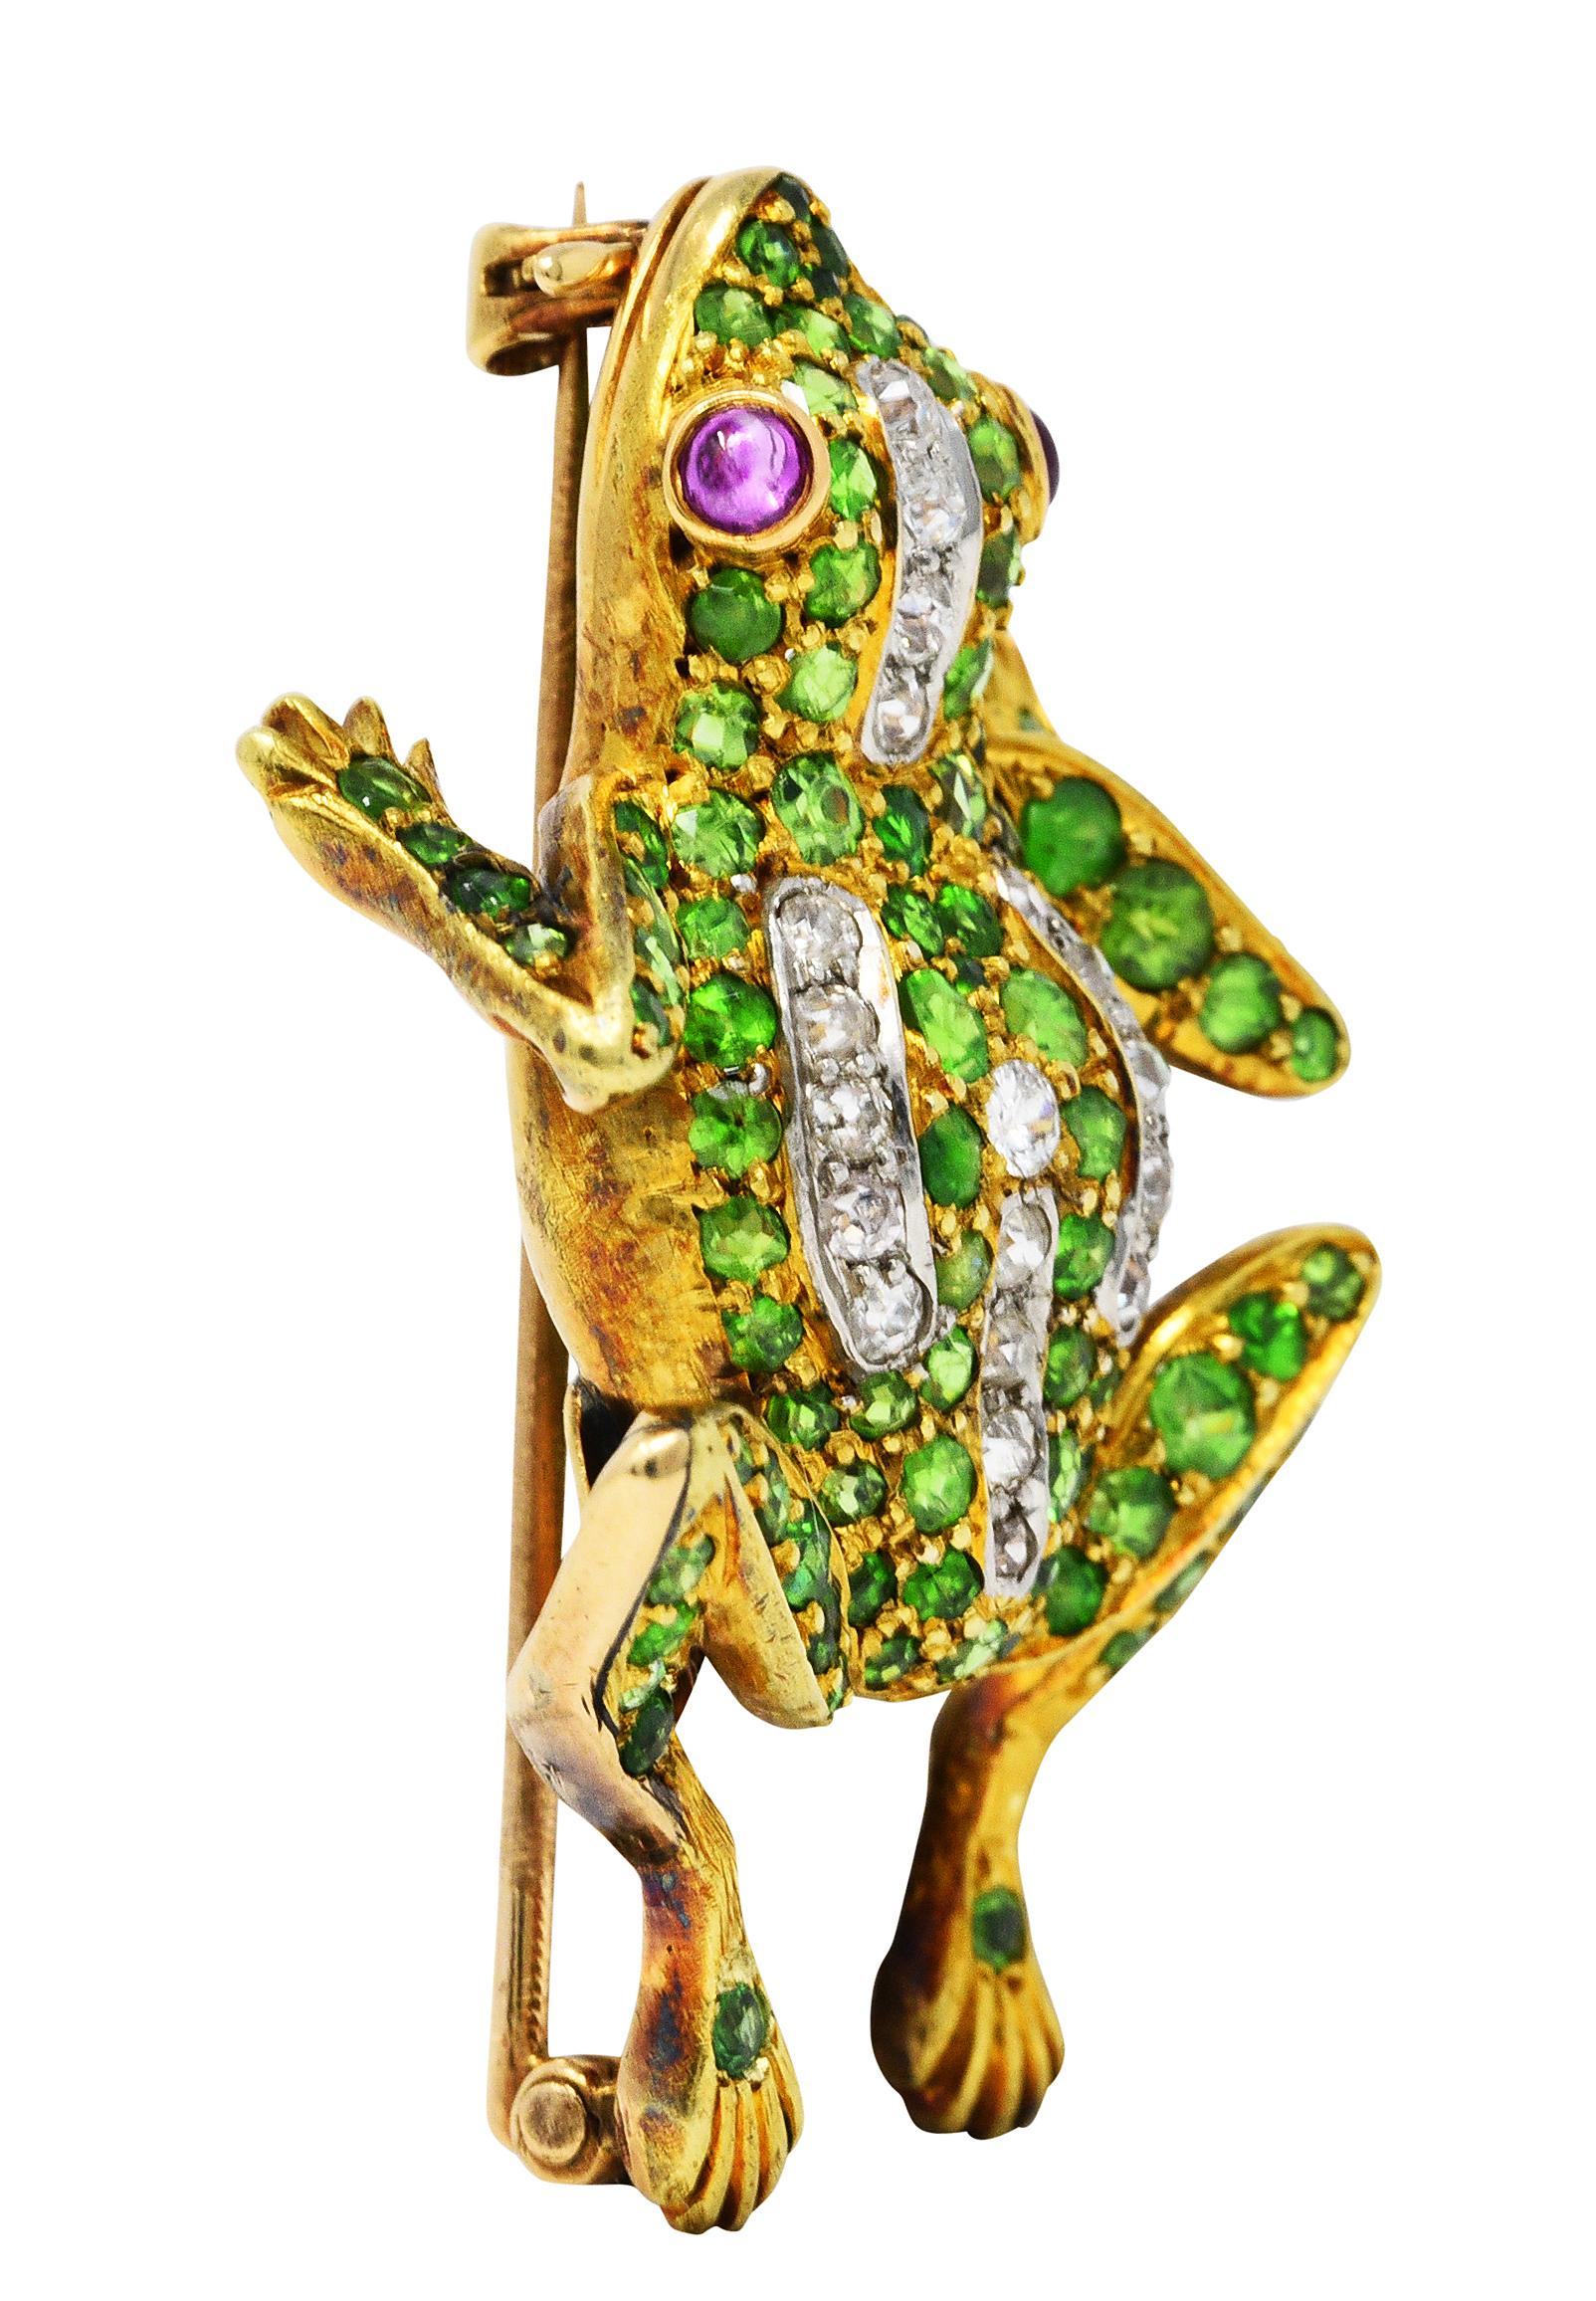 Brooch is designed as a dynamically formed frog

With ruby cabochon eyes, medium light purplish red, while weighing approximately 0.25 carat

Platinum areas are bead set with old European cut diamonds

Weighing in total approximately 0.50 carat with